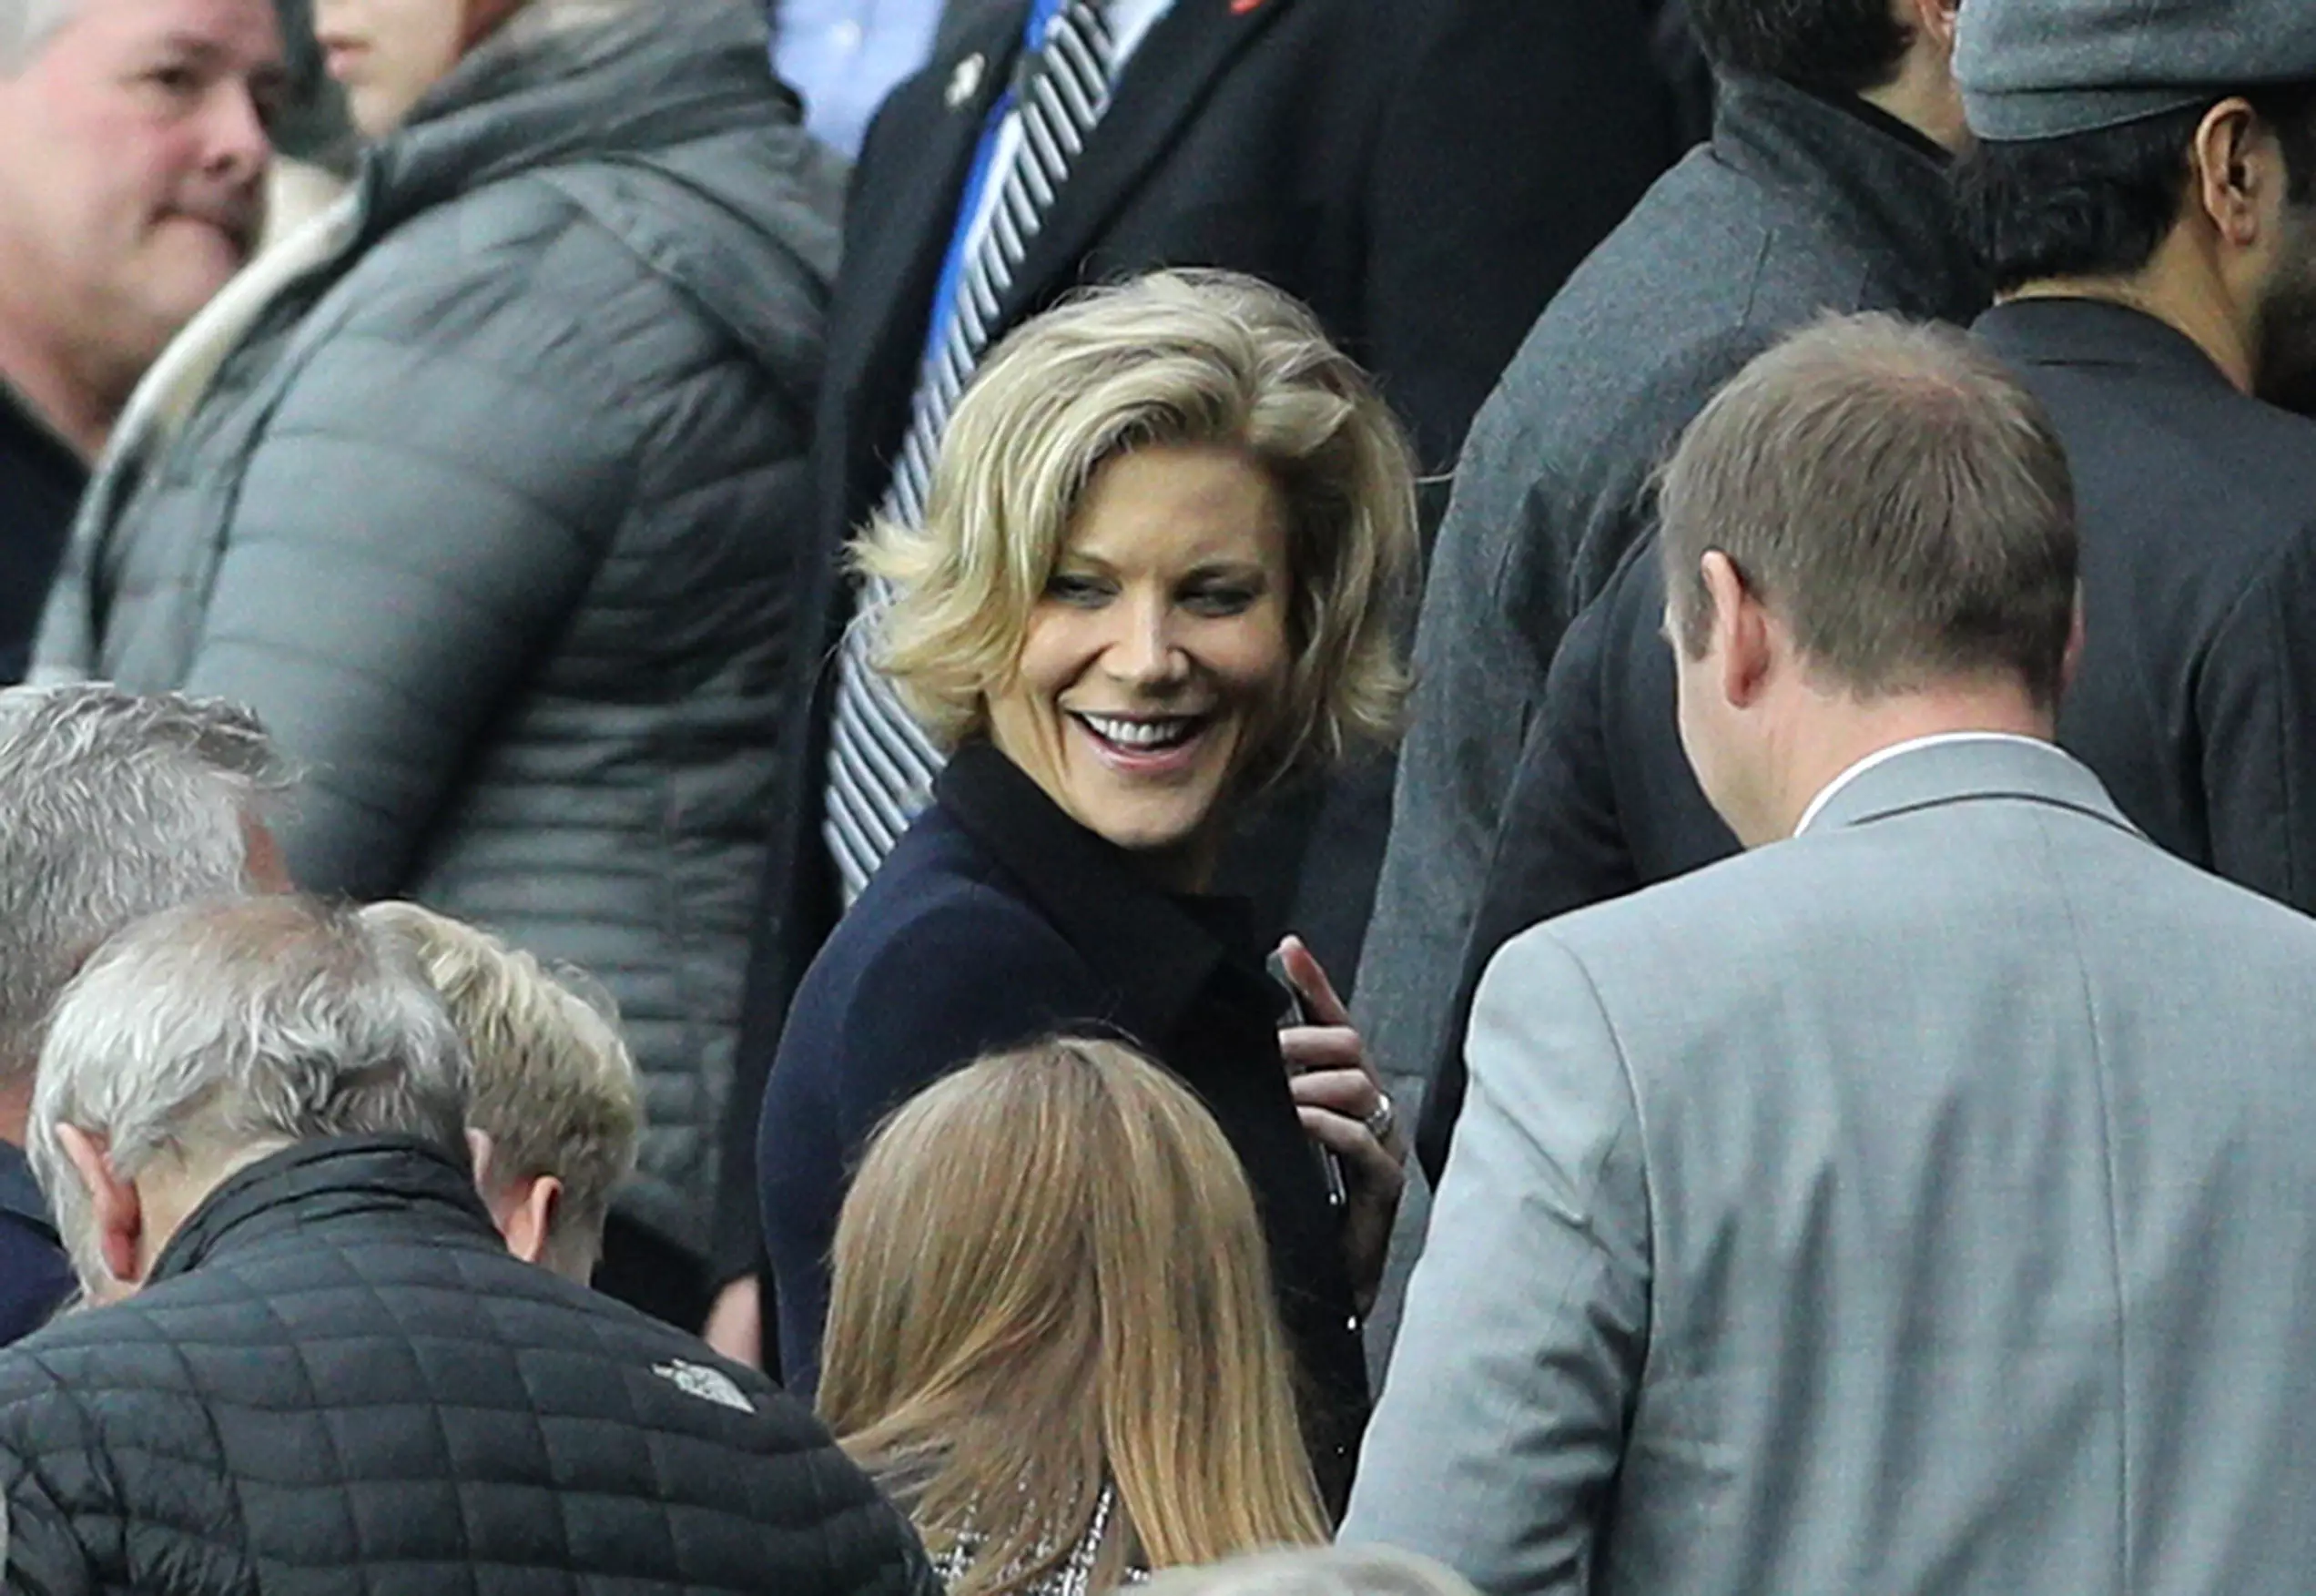 Amanda Staveley was leading the proposed takeover of Newcastle. (Image